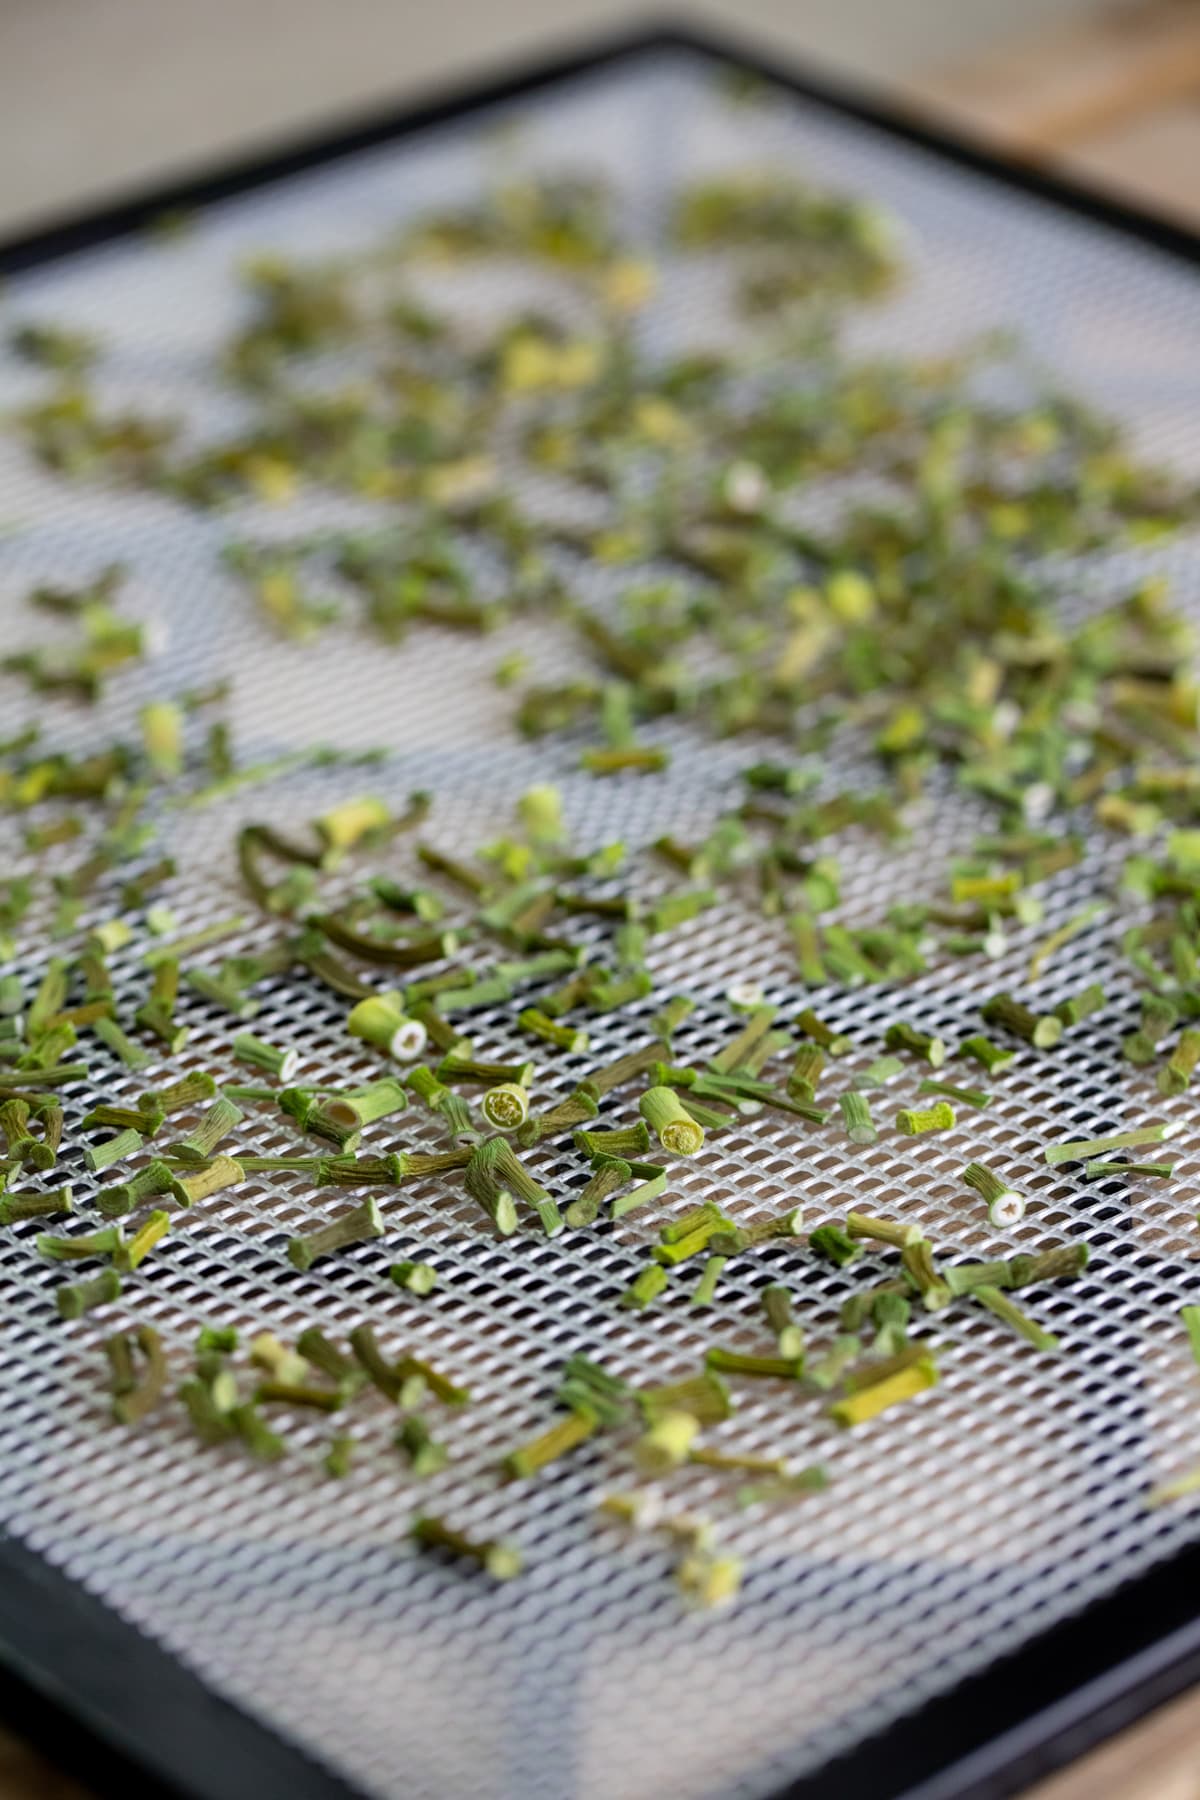 garlic scapes after dehydrating